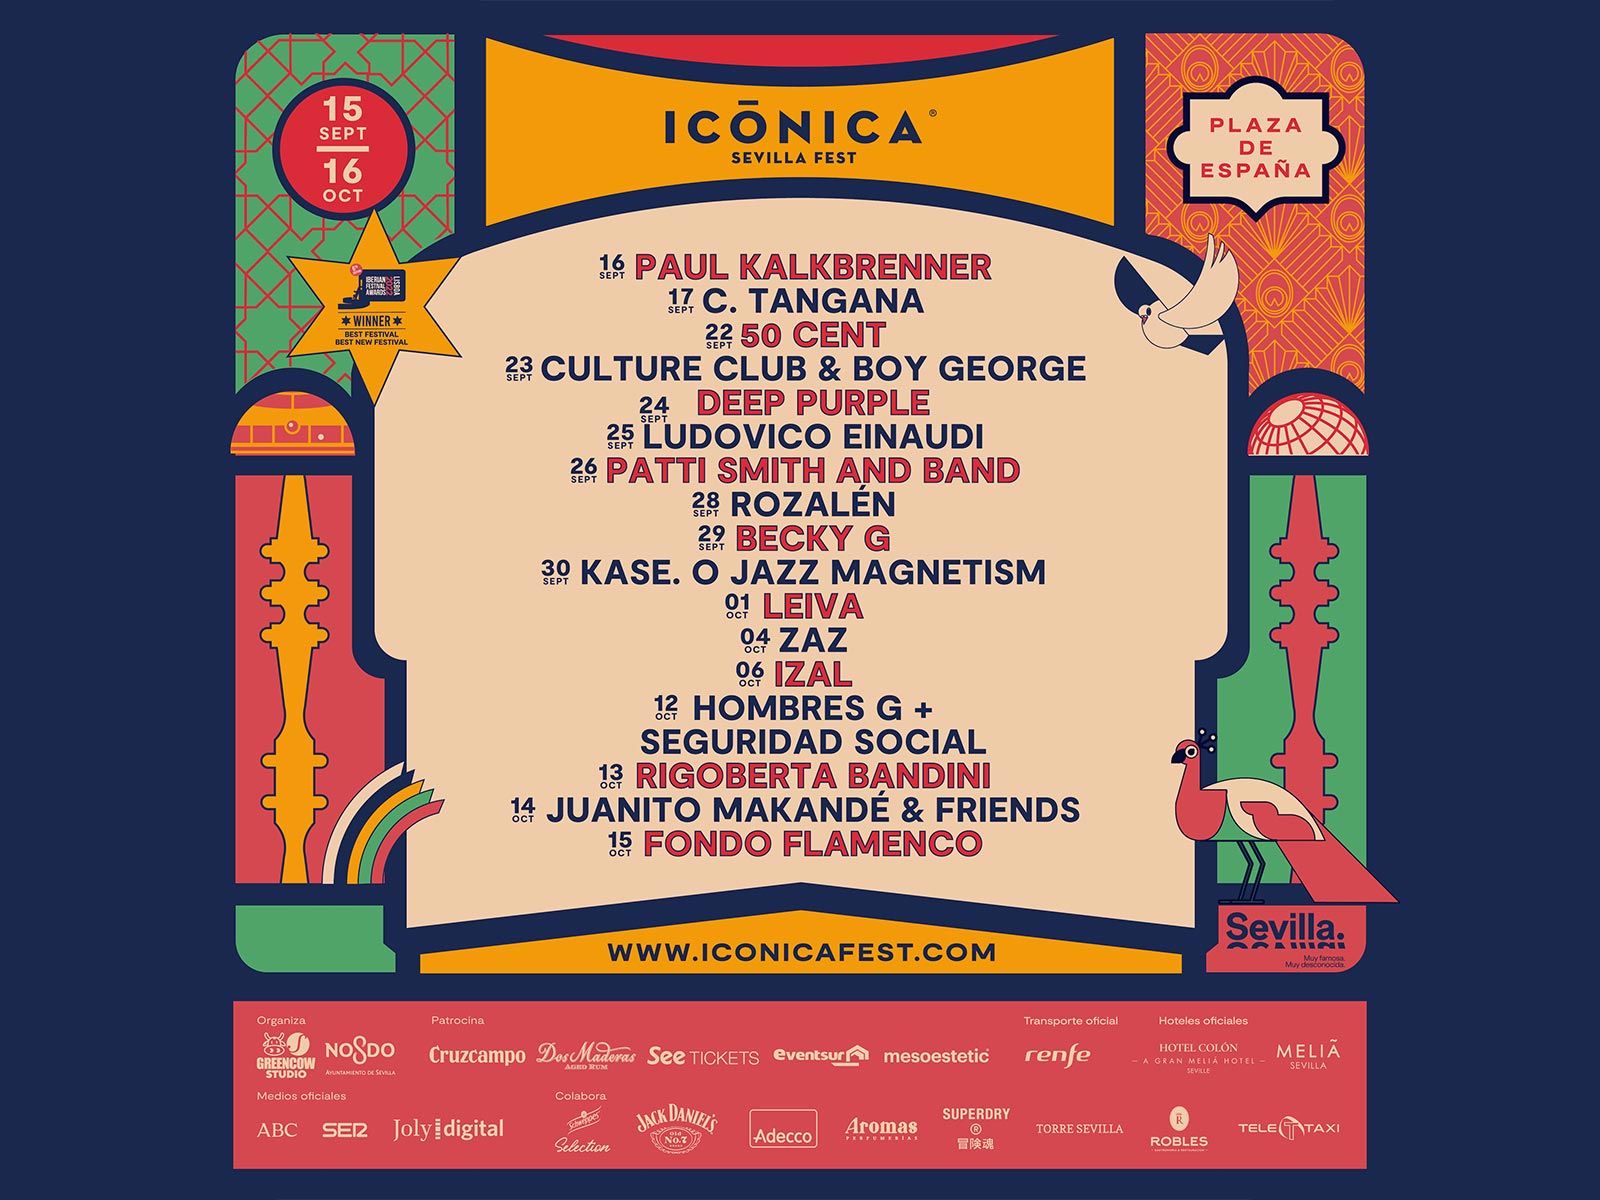 ICONICA Sevilla Fest updates its line-up with new additions